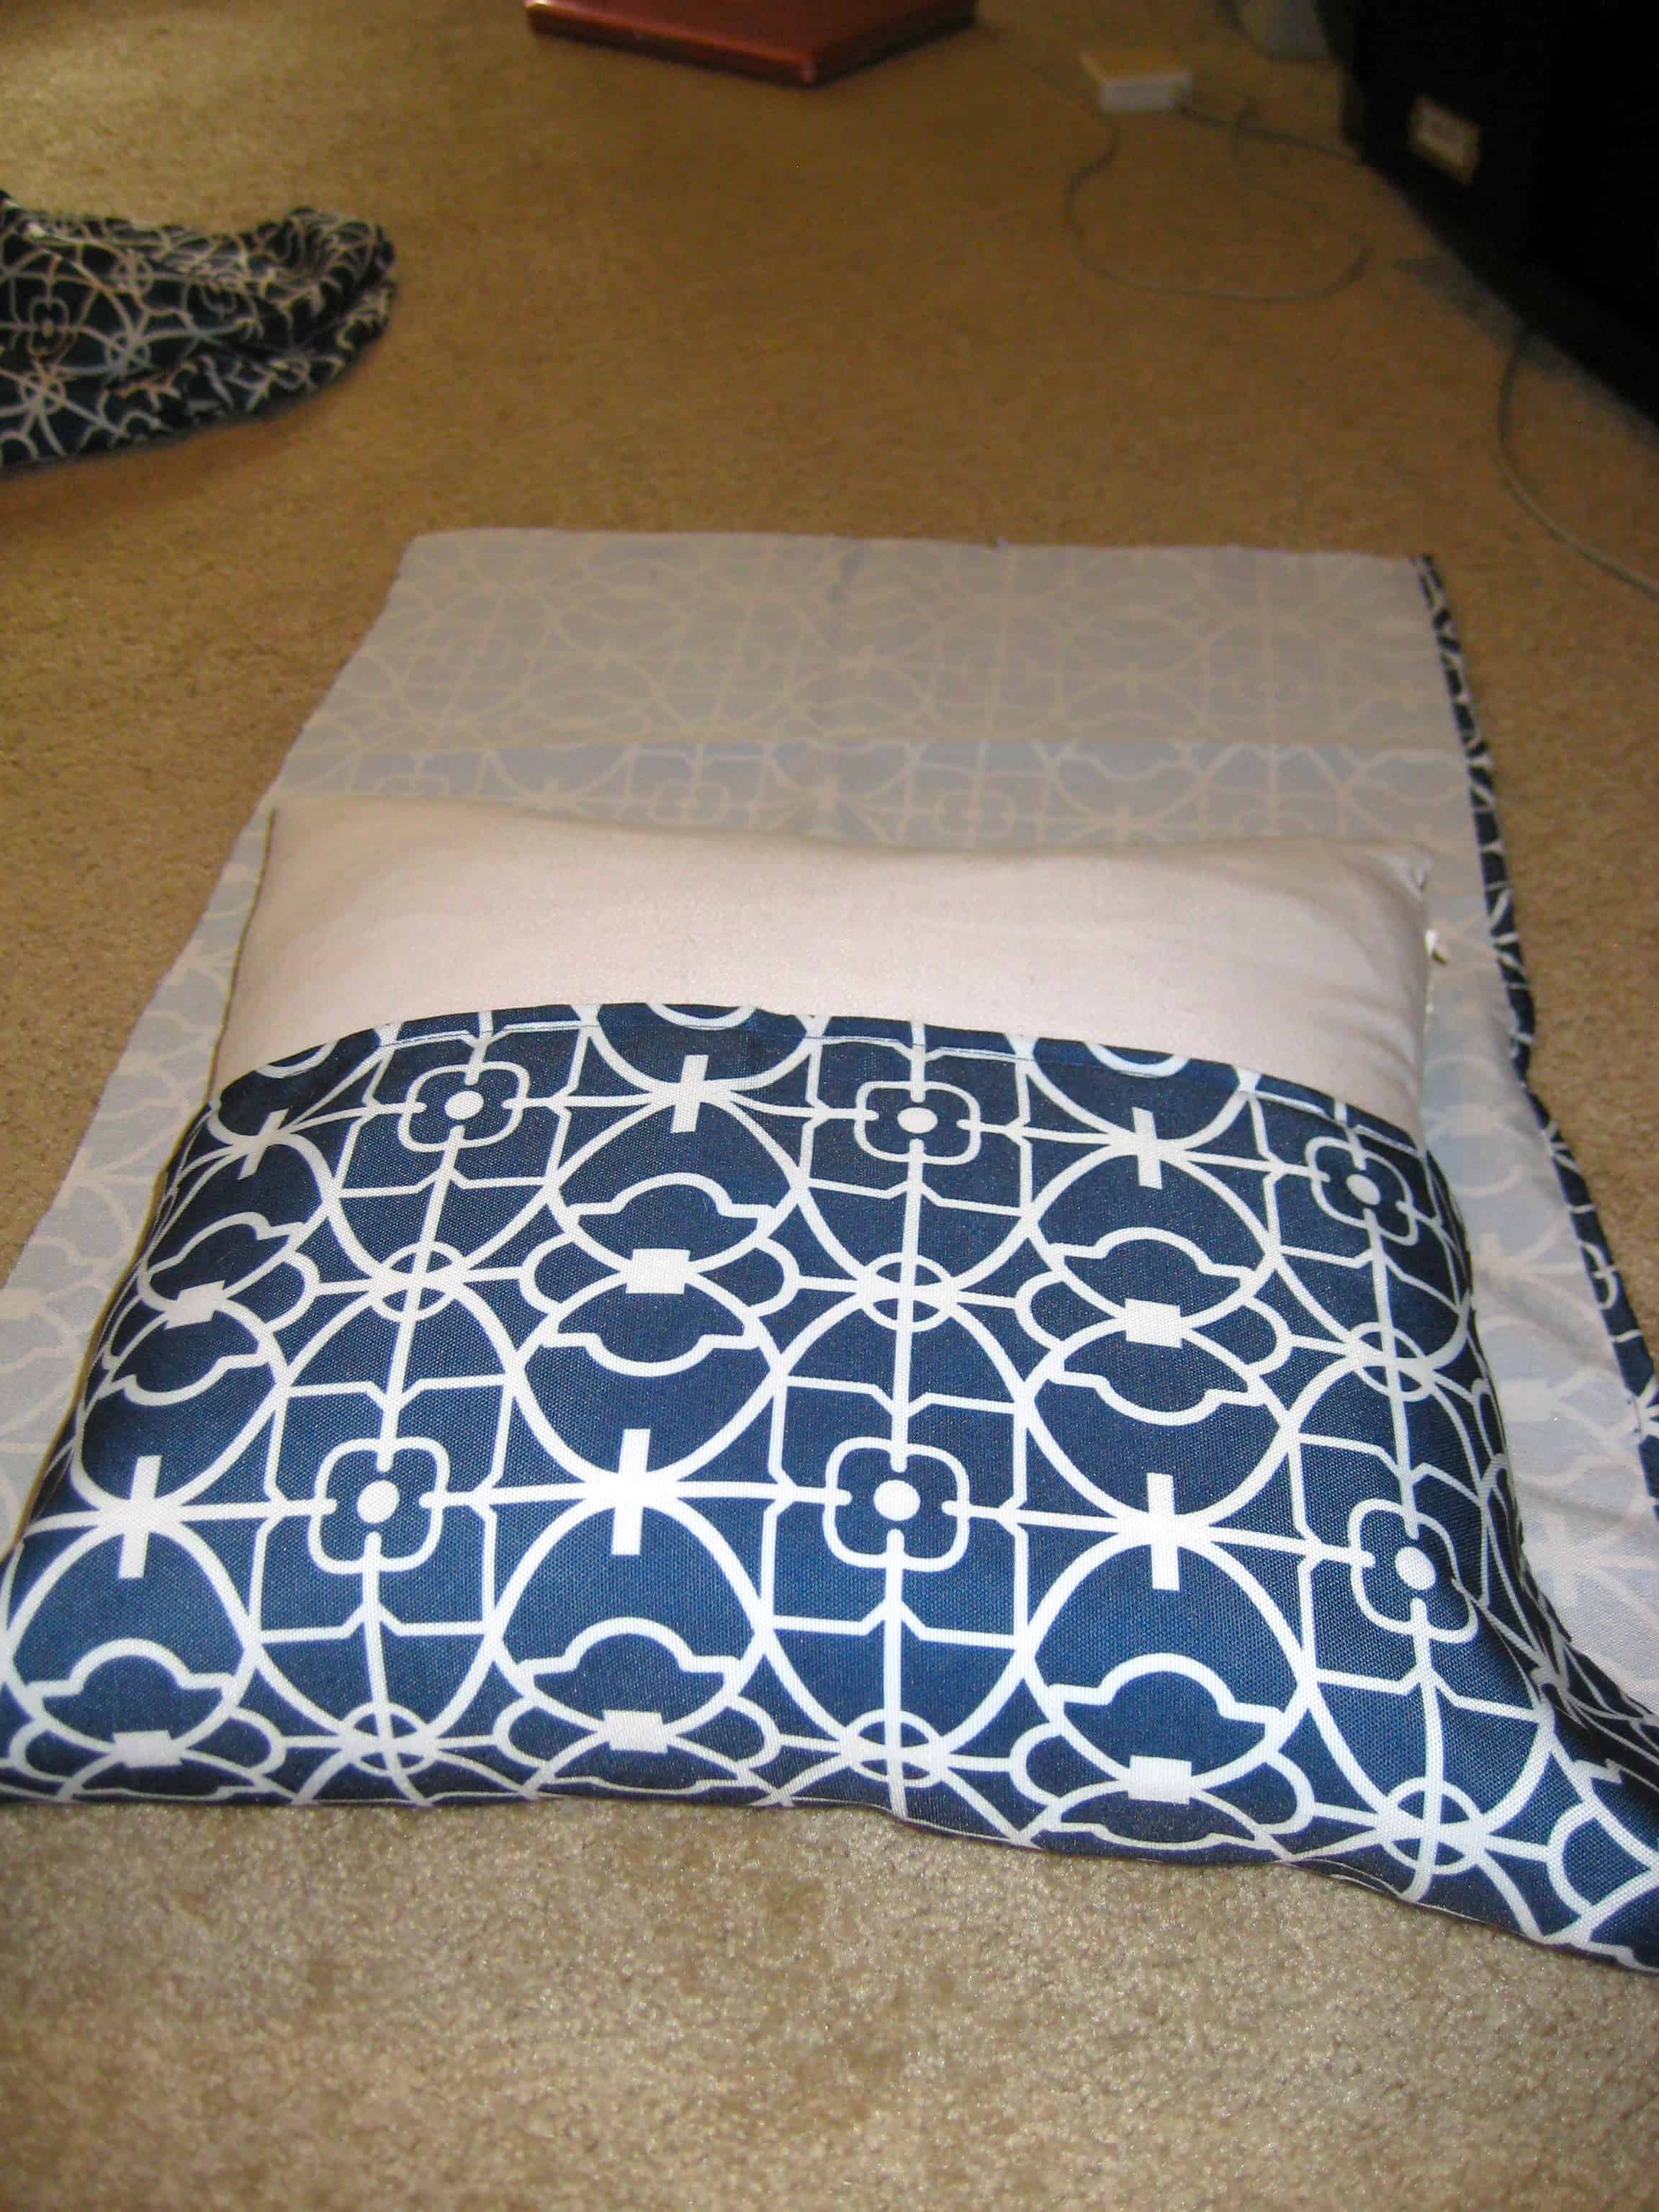 How To Make Easy Peasy No Sew Envelope Style Pillow Covers - Diy Envelope Pillow Cover No Sew